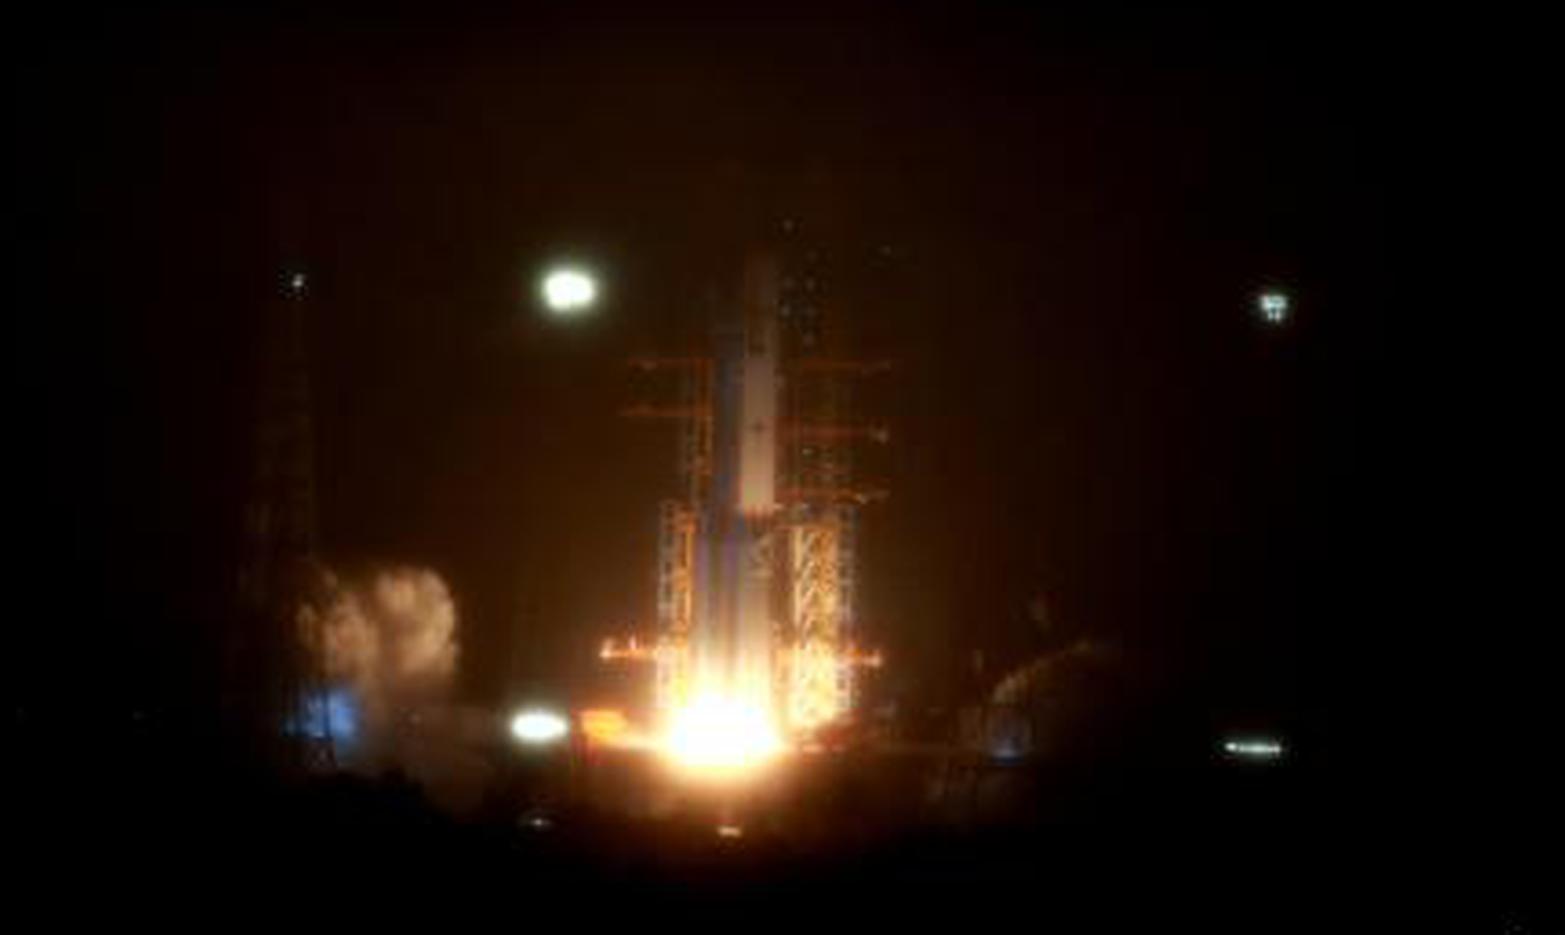 China launches Shijian-23 satellite into space